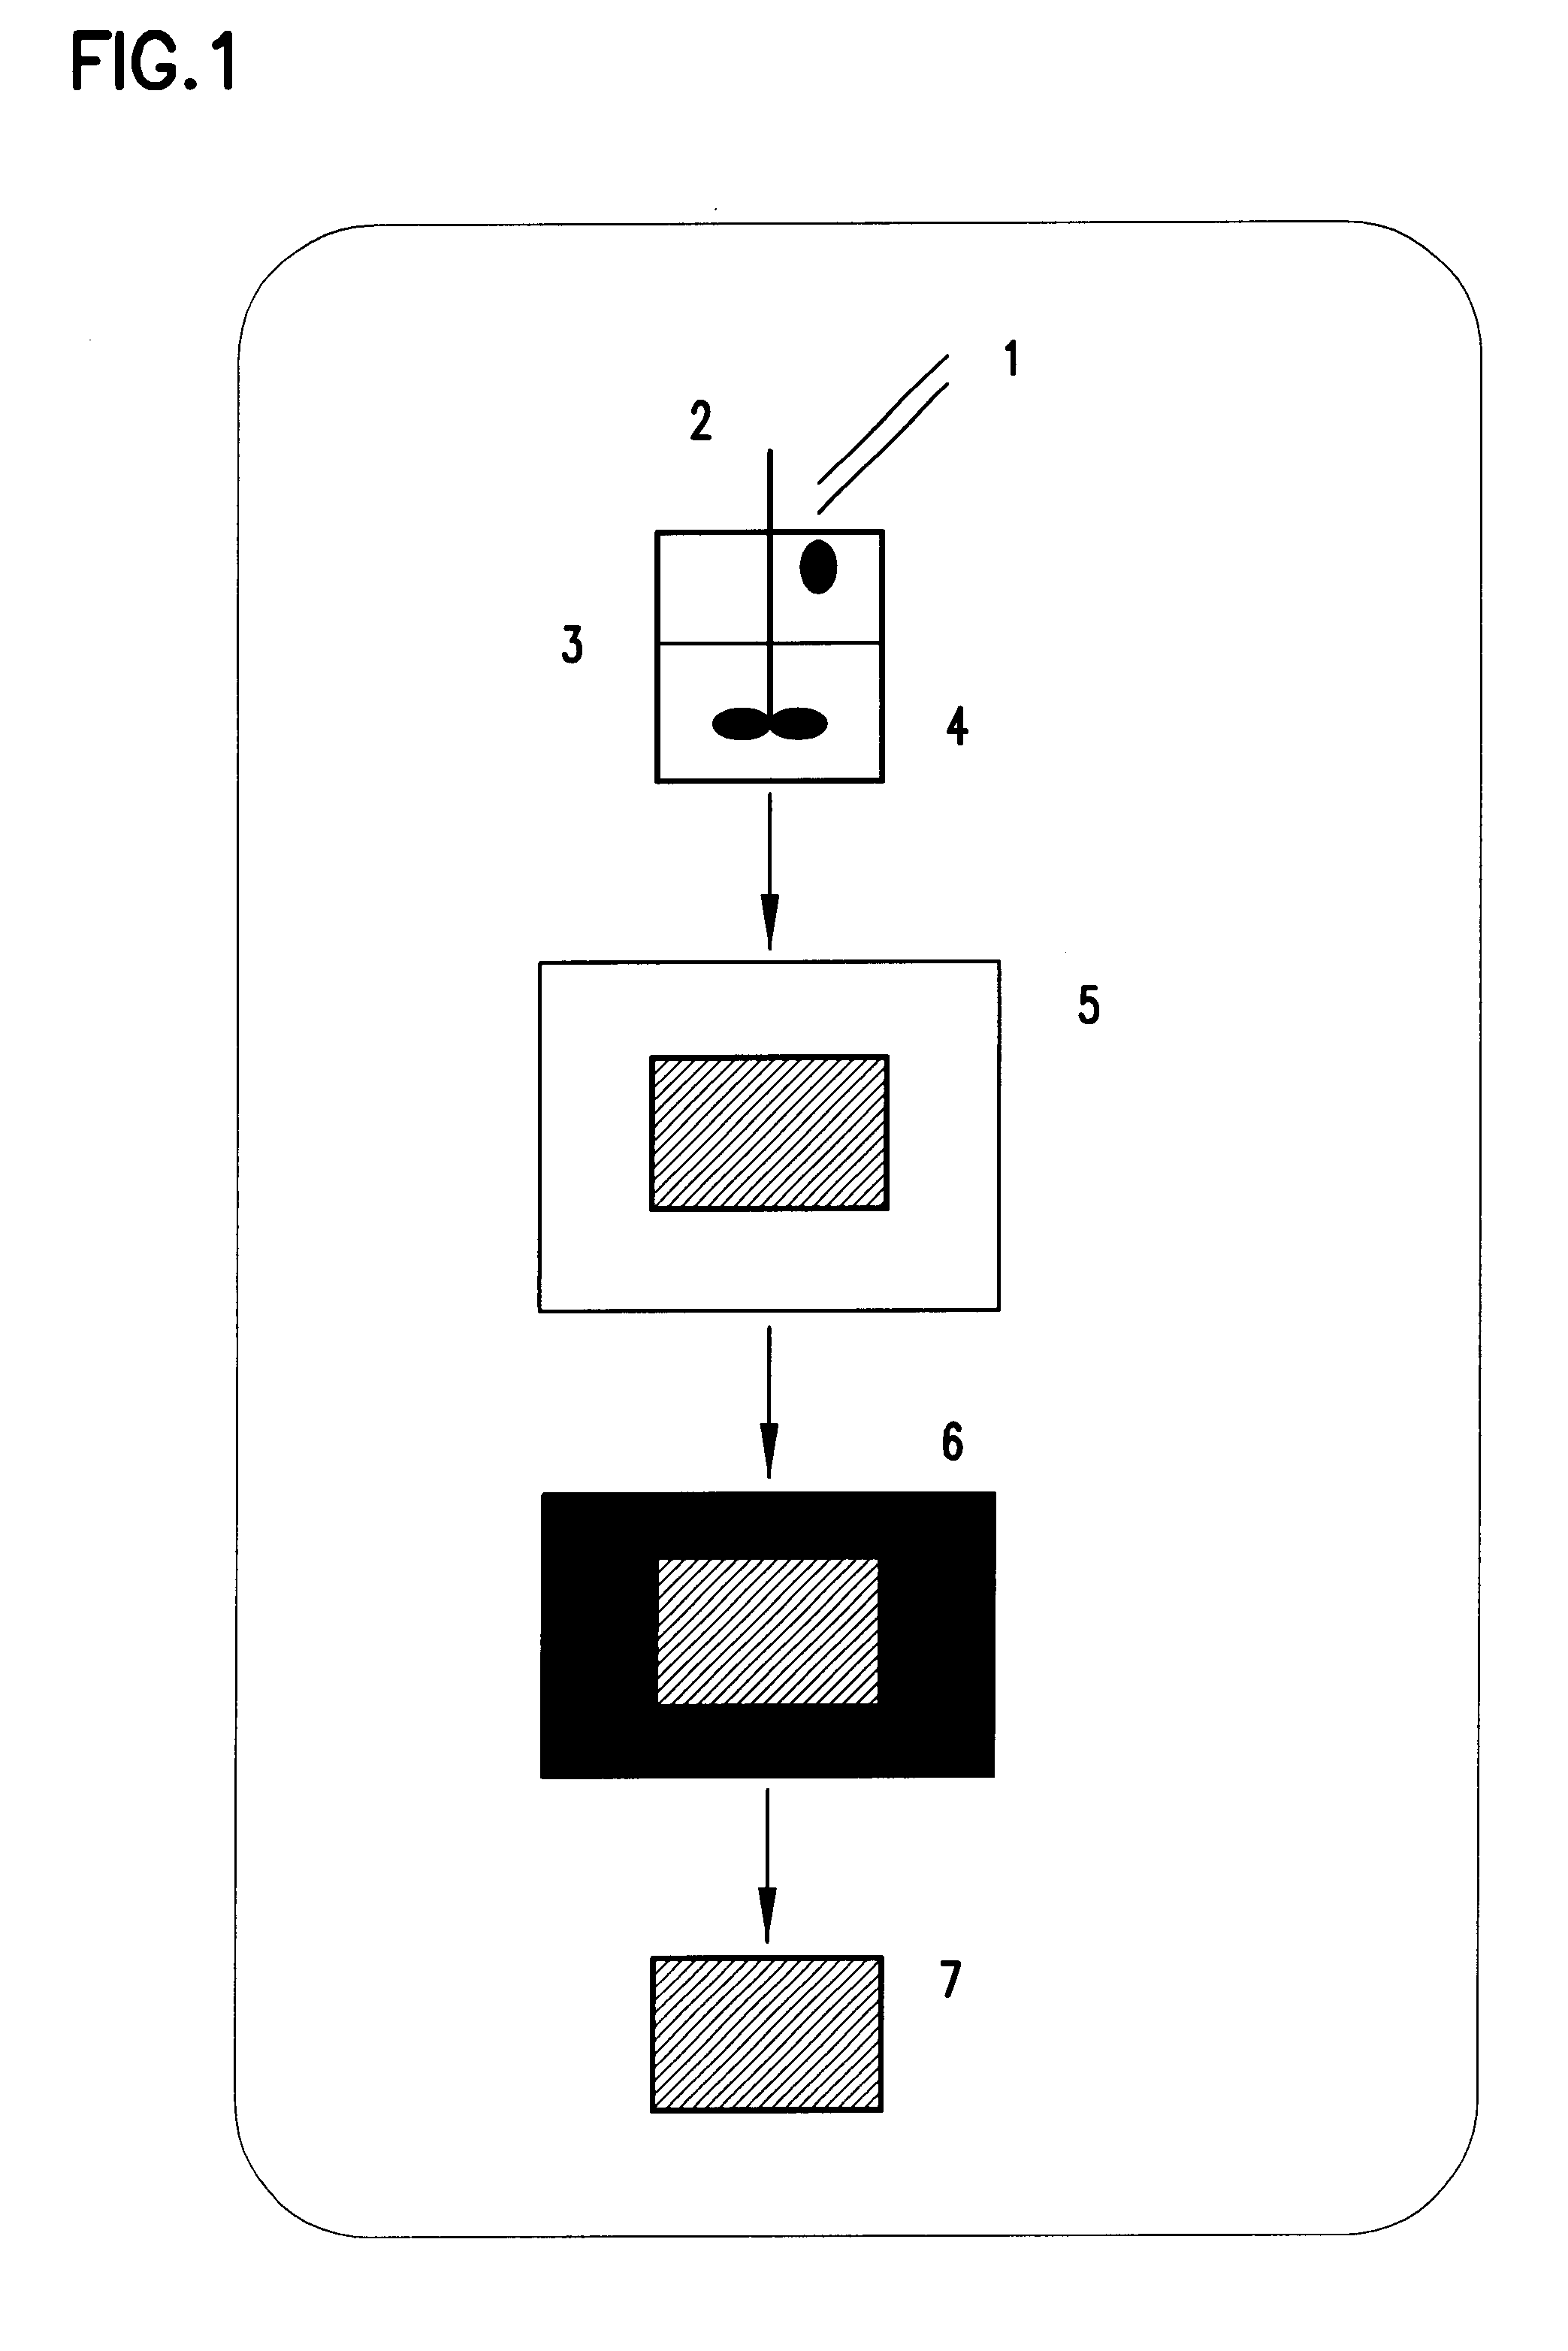 Method of forming polysaccharide sponges for cell culture and transplantation